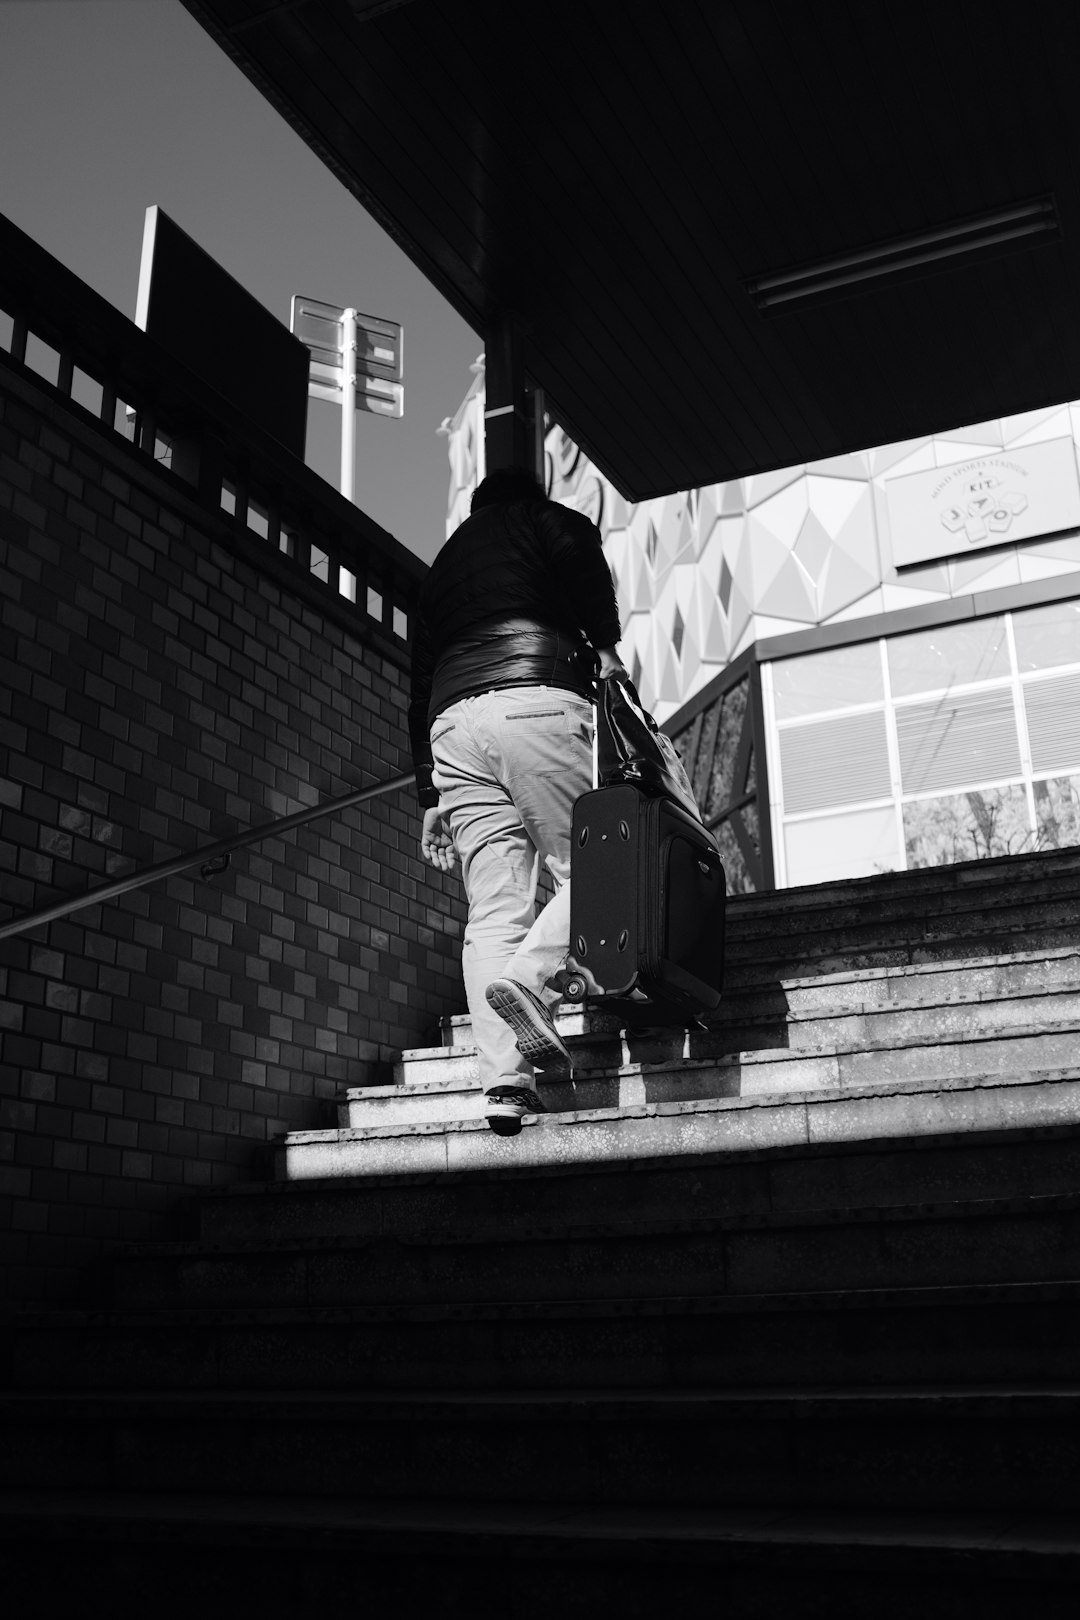 grayscale photography of person walking on stairway while carrying luggage during daytime